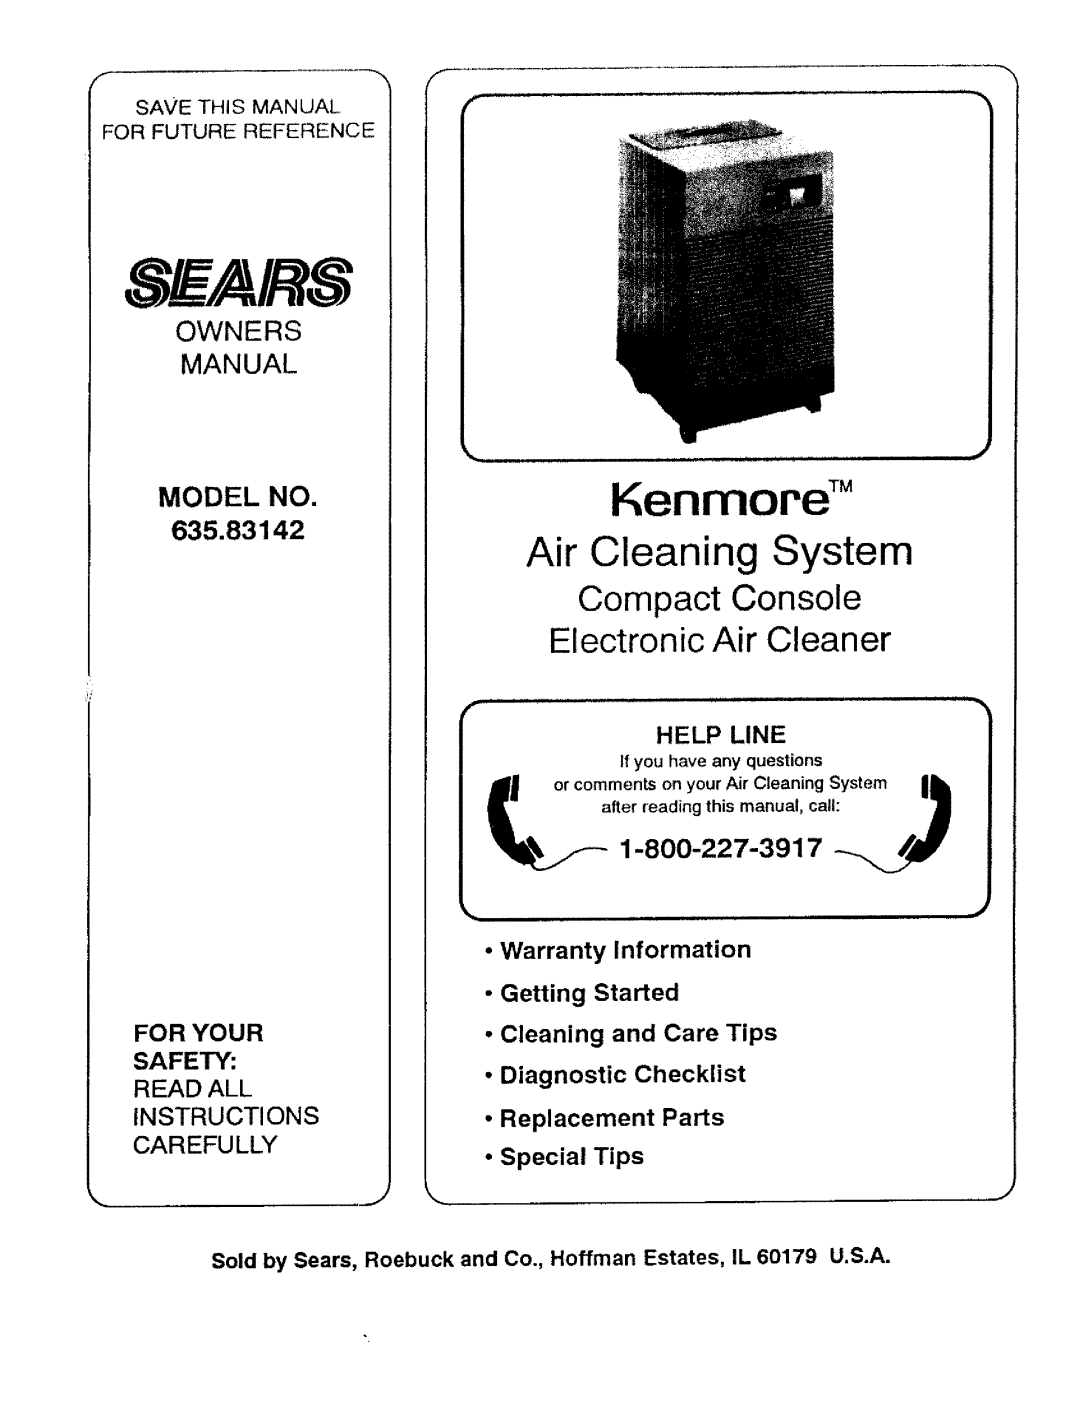 Sears 635.83142 owner manual Air Cleaning System, For Your Safety, Help, Line, Kenmore TM, Owners Manual, Model No, i r it 